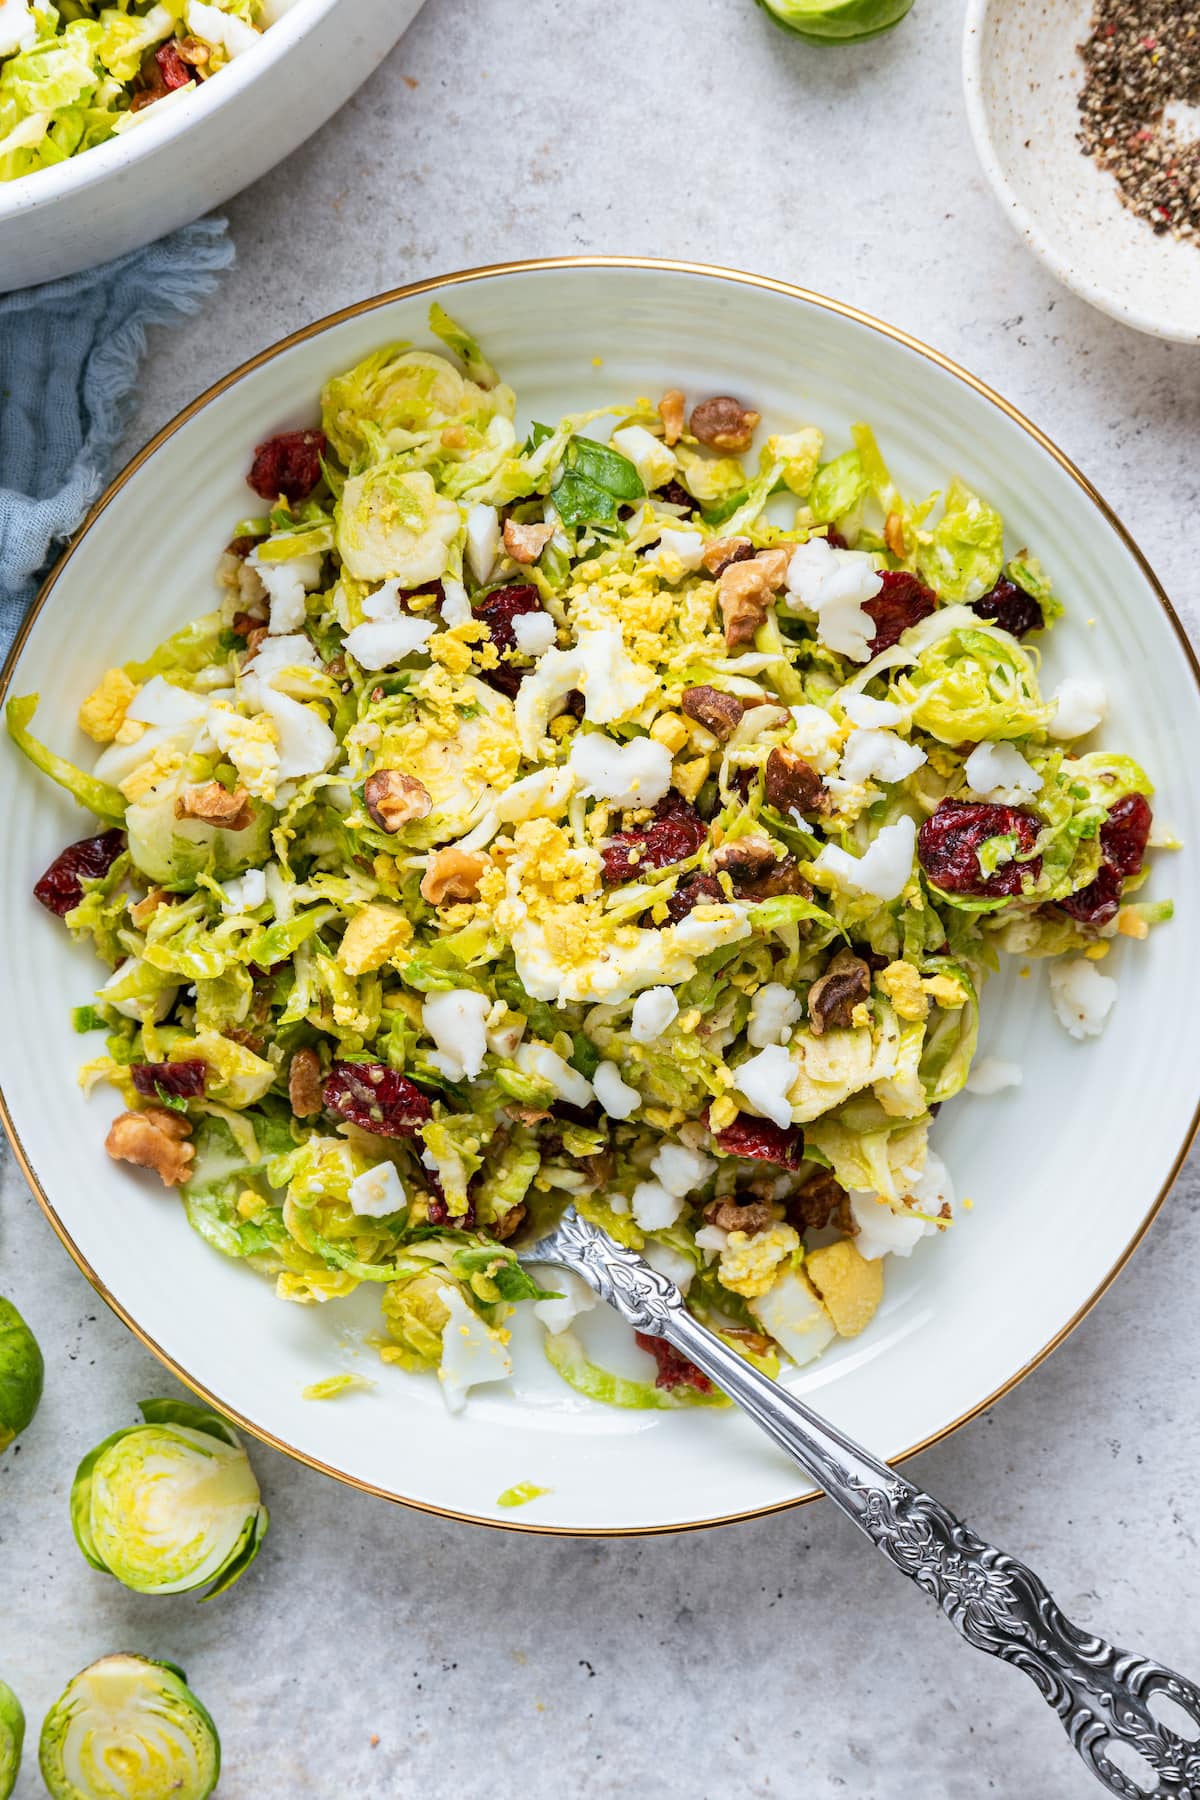 A white plate with a serving of the Brussels sprout chopped salad.